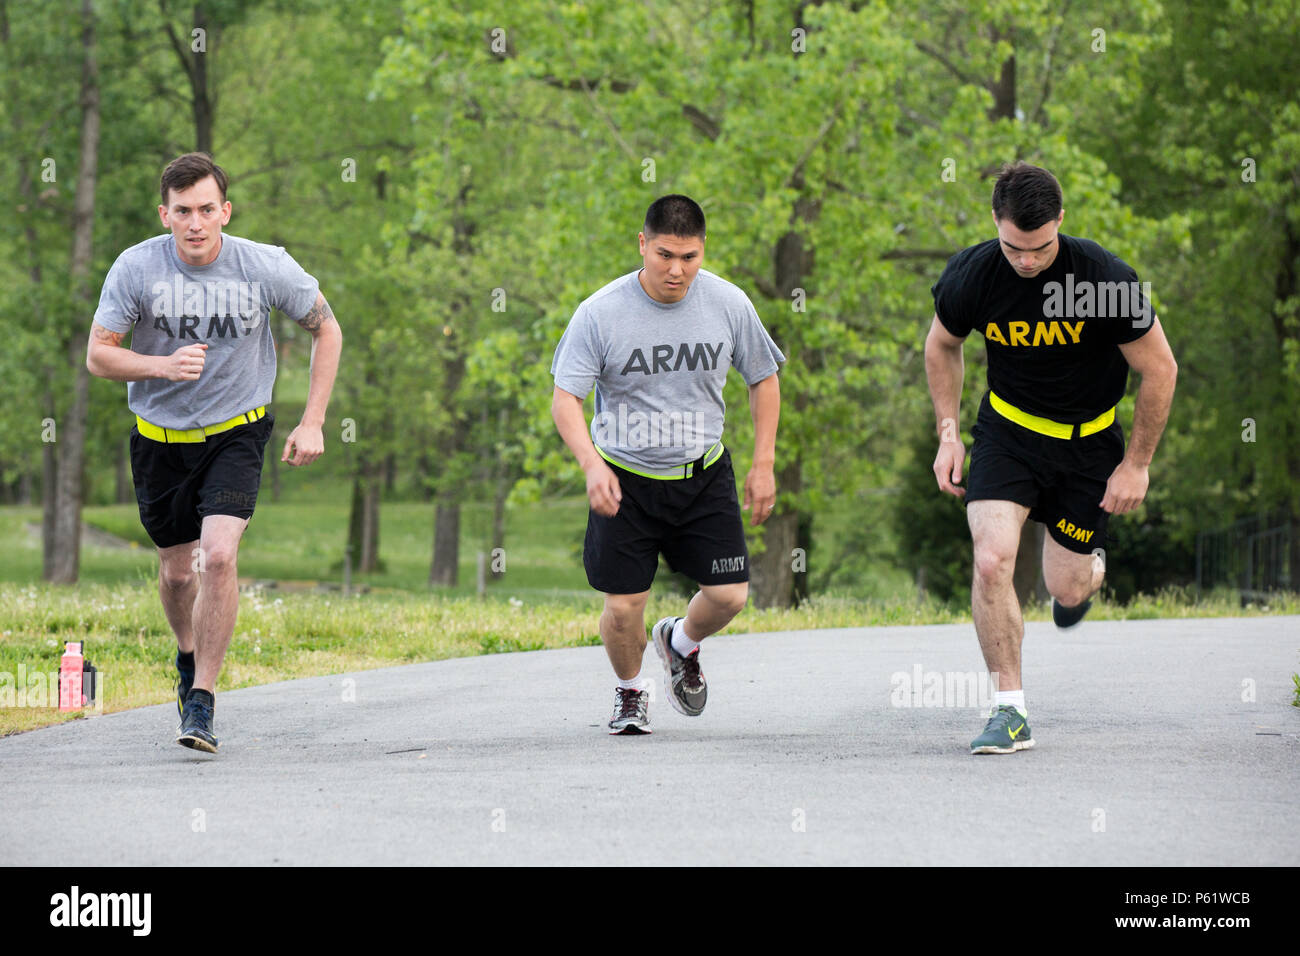 U.S. Army Spc. Jason Green, Sgt. James Ahn, and Staff Sgt. Jesse Harris, assigned to the 49th Ordnance Company (EOD), 184th Ordnance Battalion (EOD), start the 2-mile run event of the Army Physical Fitness Test (APFT) at the beginning of the 52nd and 111th Ordnance Group (EOD) Team of the Year 2016 at the Wendell H. Ford Regional Training Center, Greenville, Ky., April 25, 2016. The weeklong competition tests teams, consisting of (2 to 3) EOD technicians, in various scenarios they may encounter in situations around the world, to determine the most physically, mentally, tactically, and technica Stock Photo